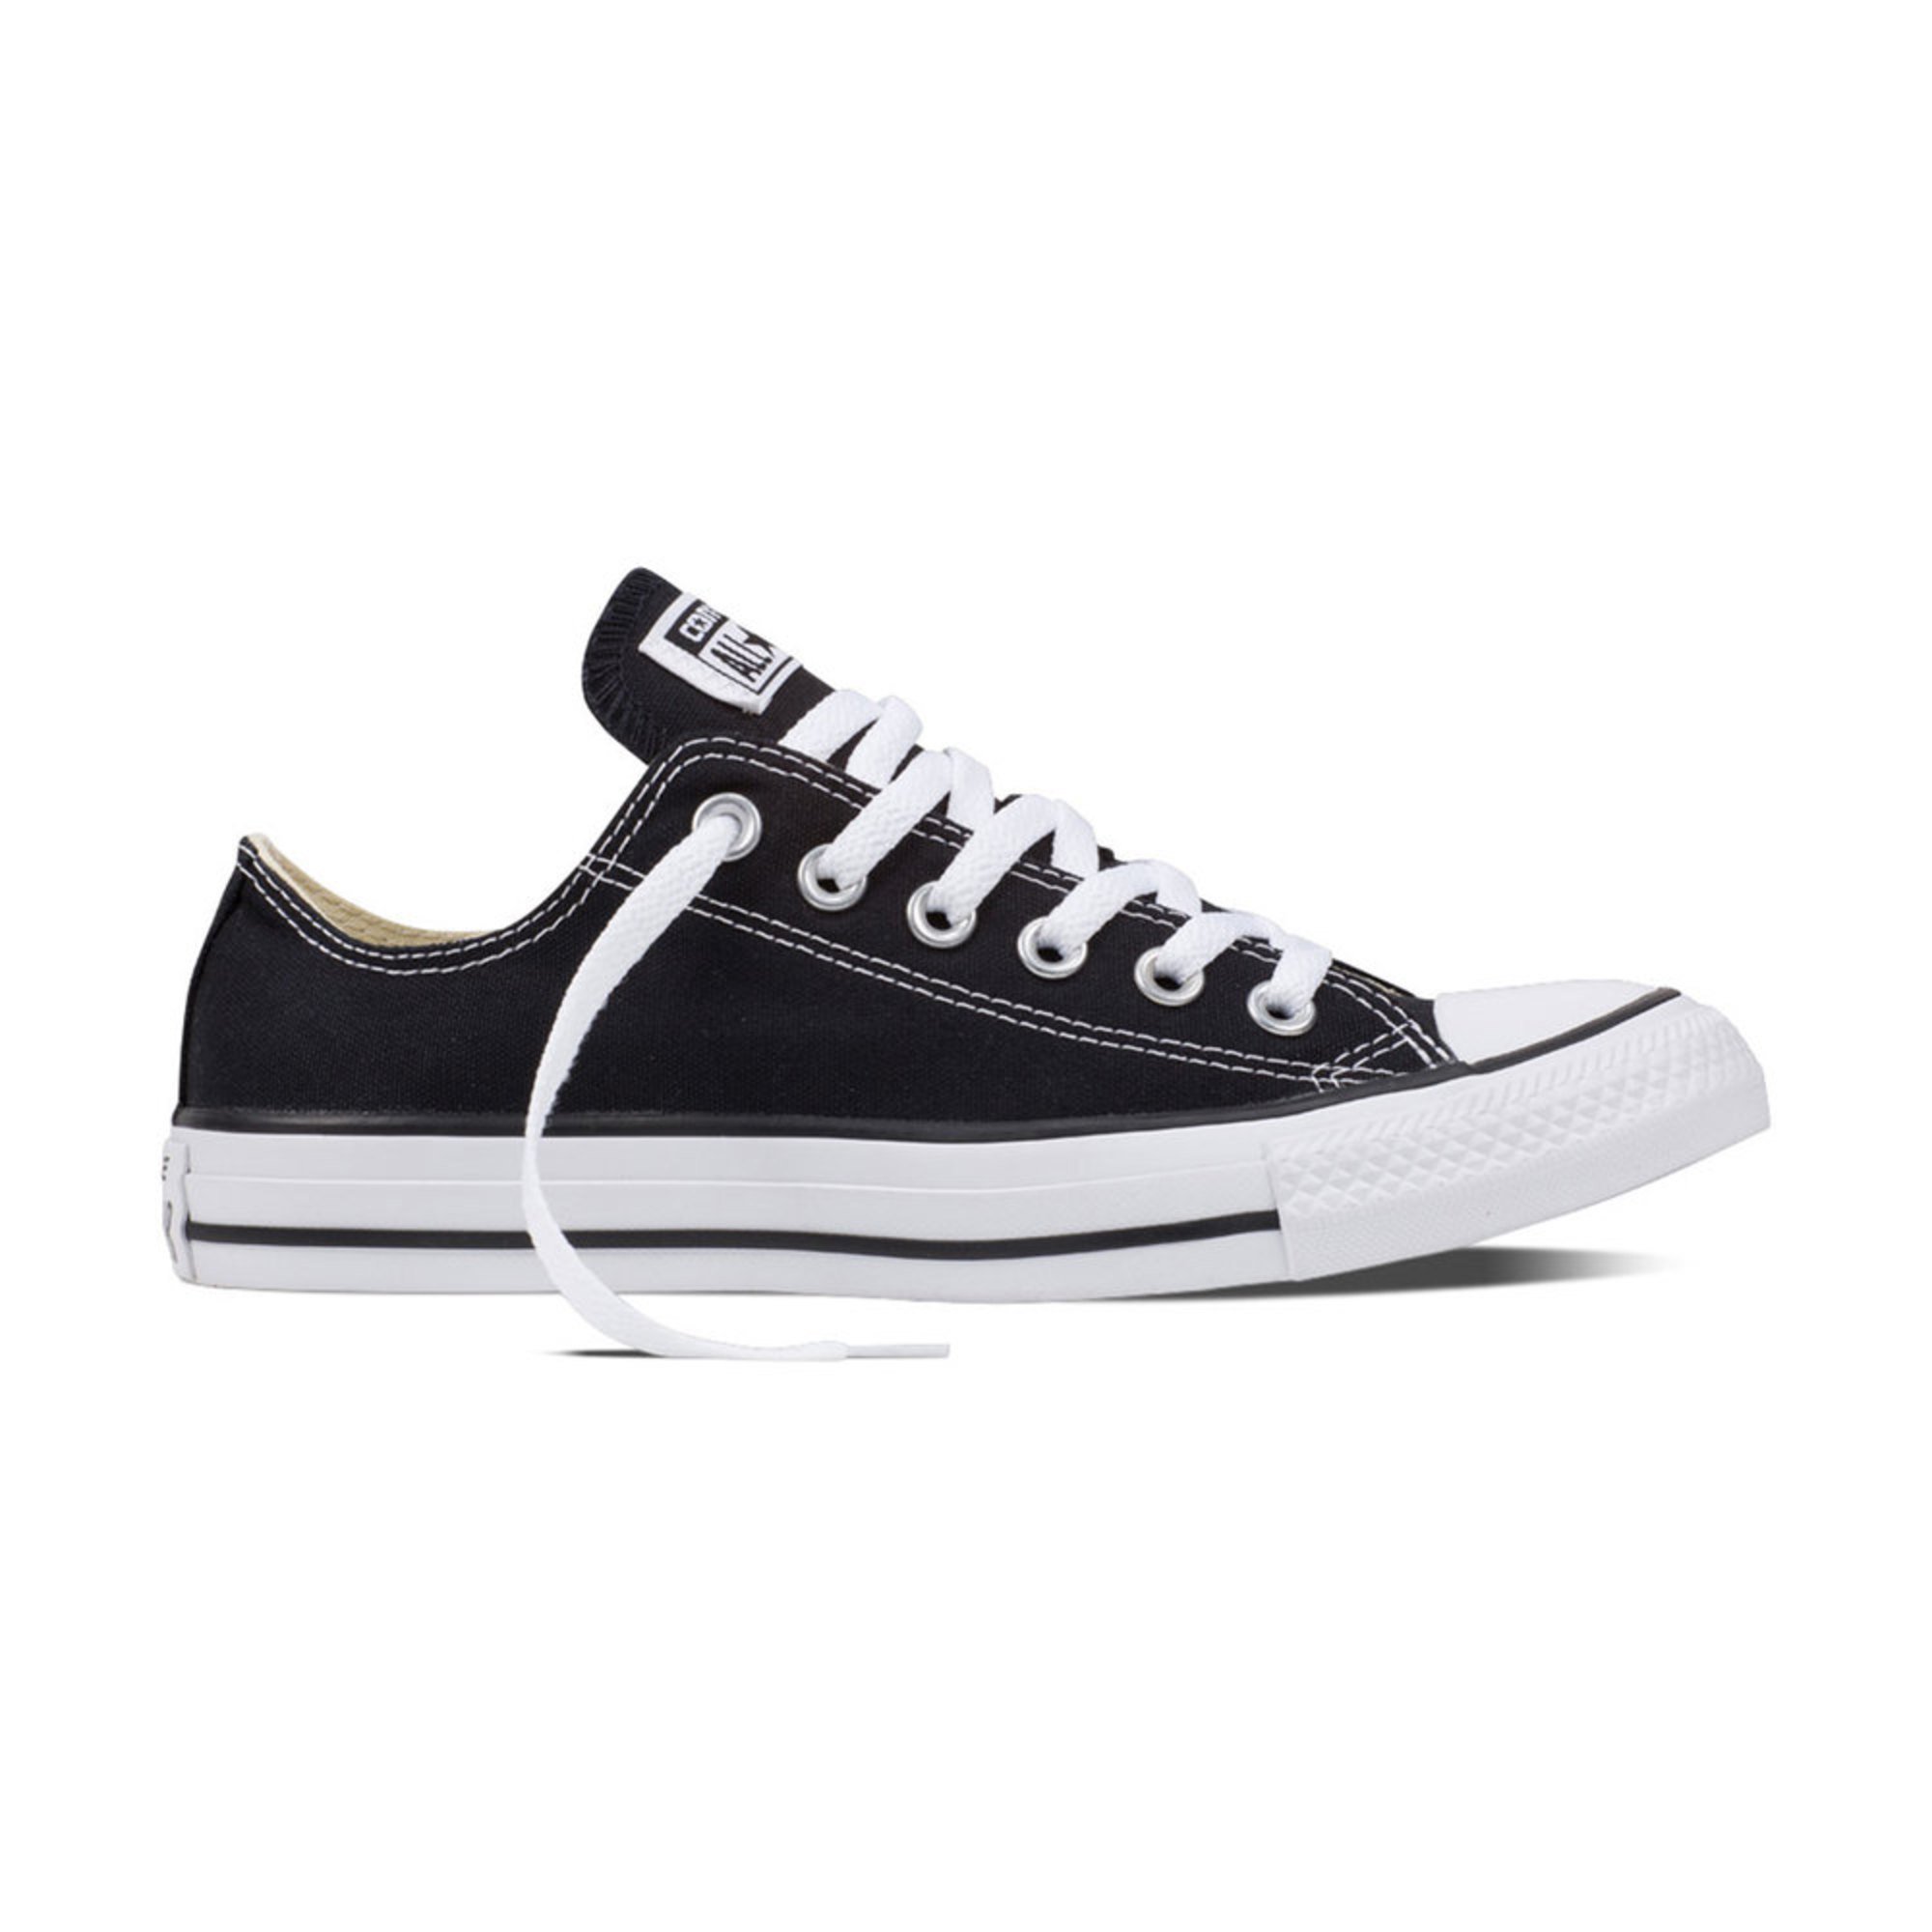 converse all star shop on line